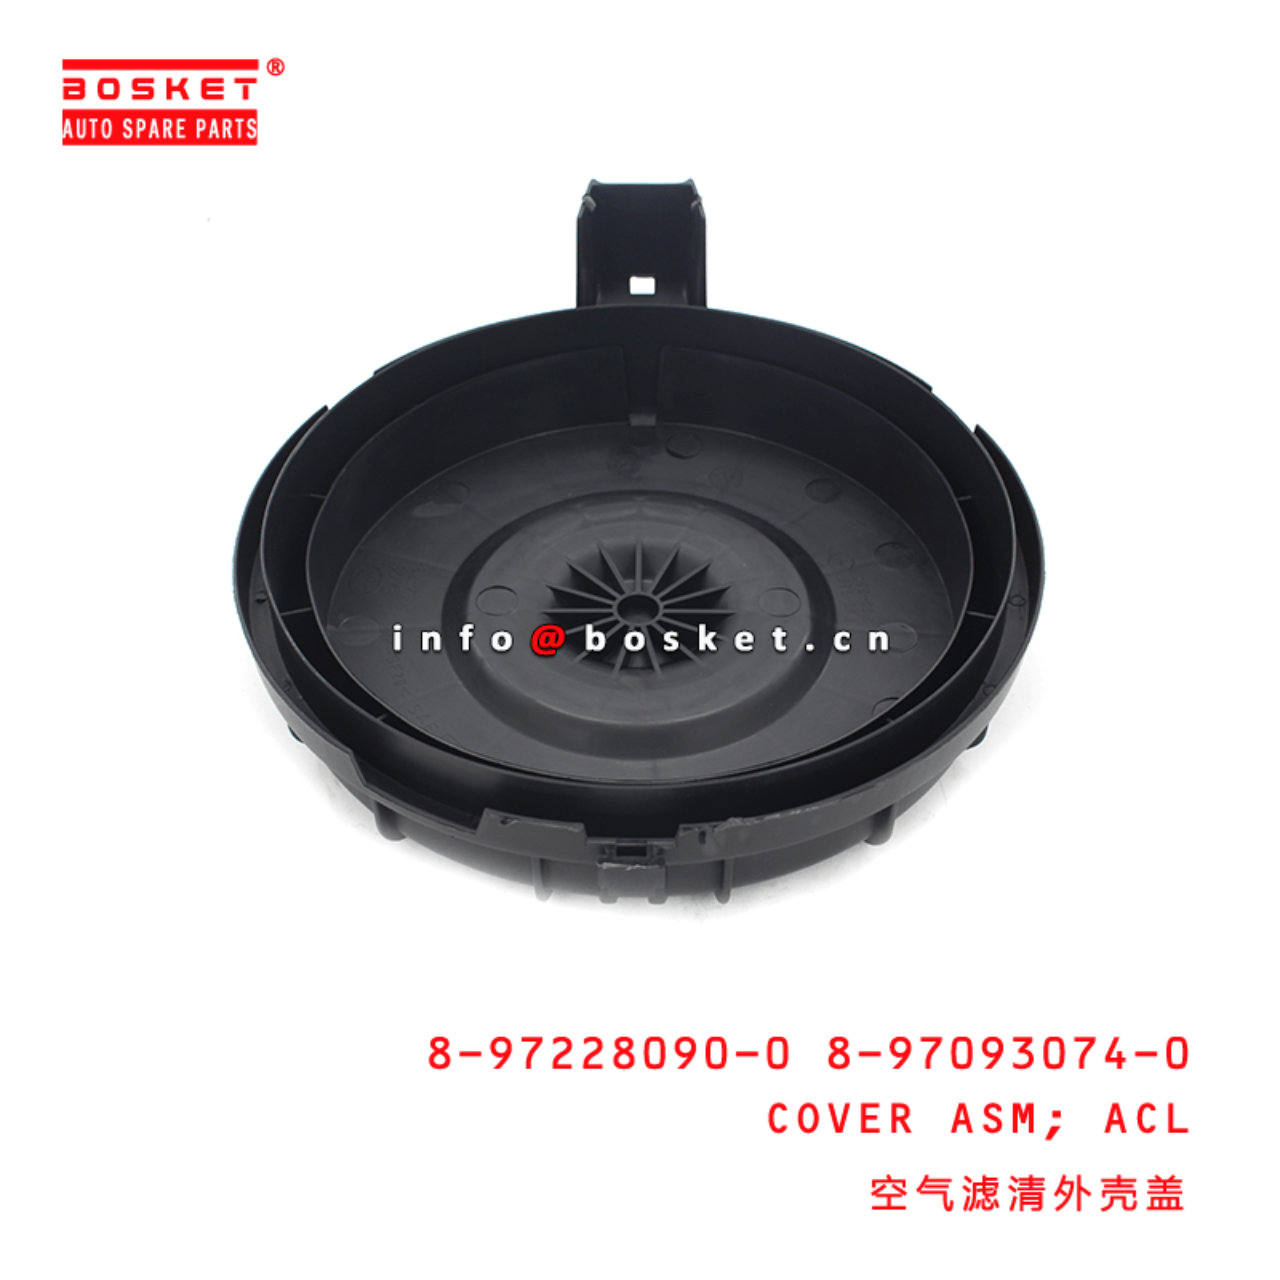 8-97228090-0 8-97093074-0 8972280900 8970930740 Air Cleaner Cover 